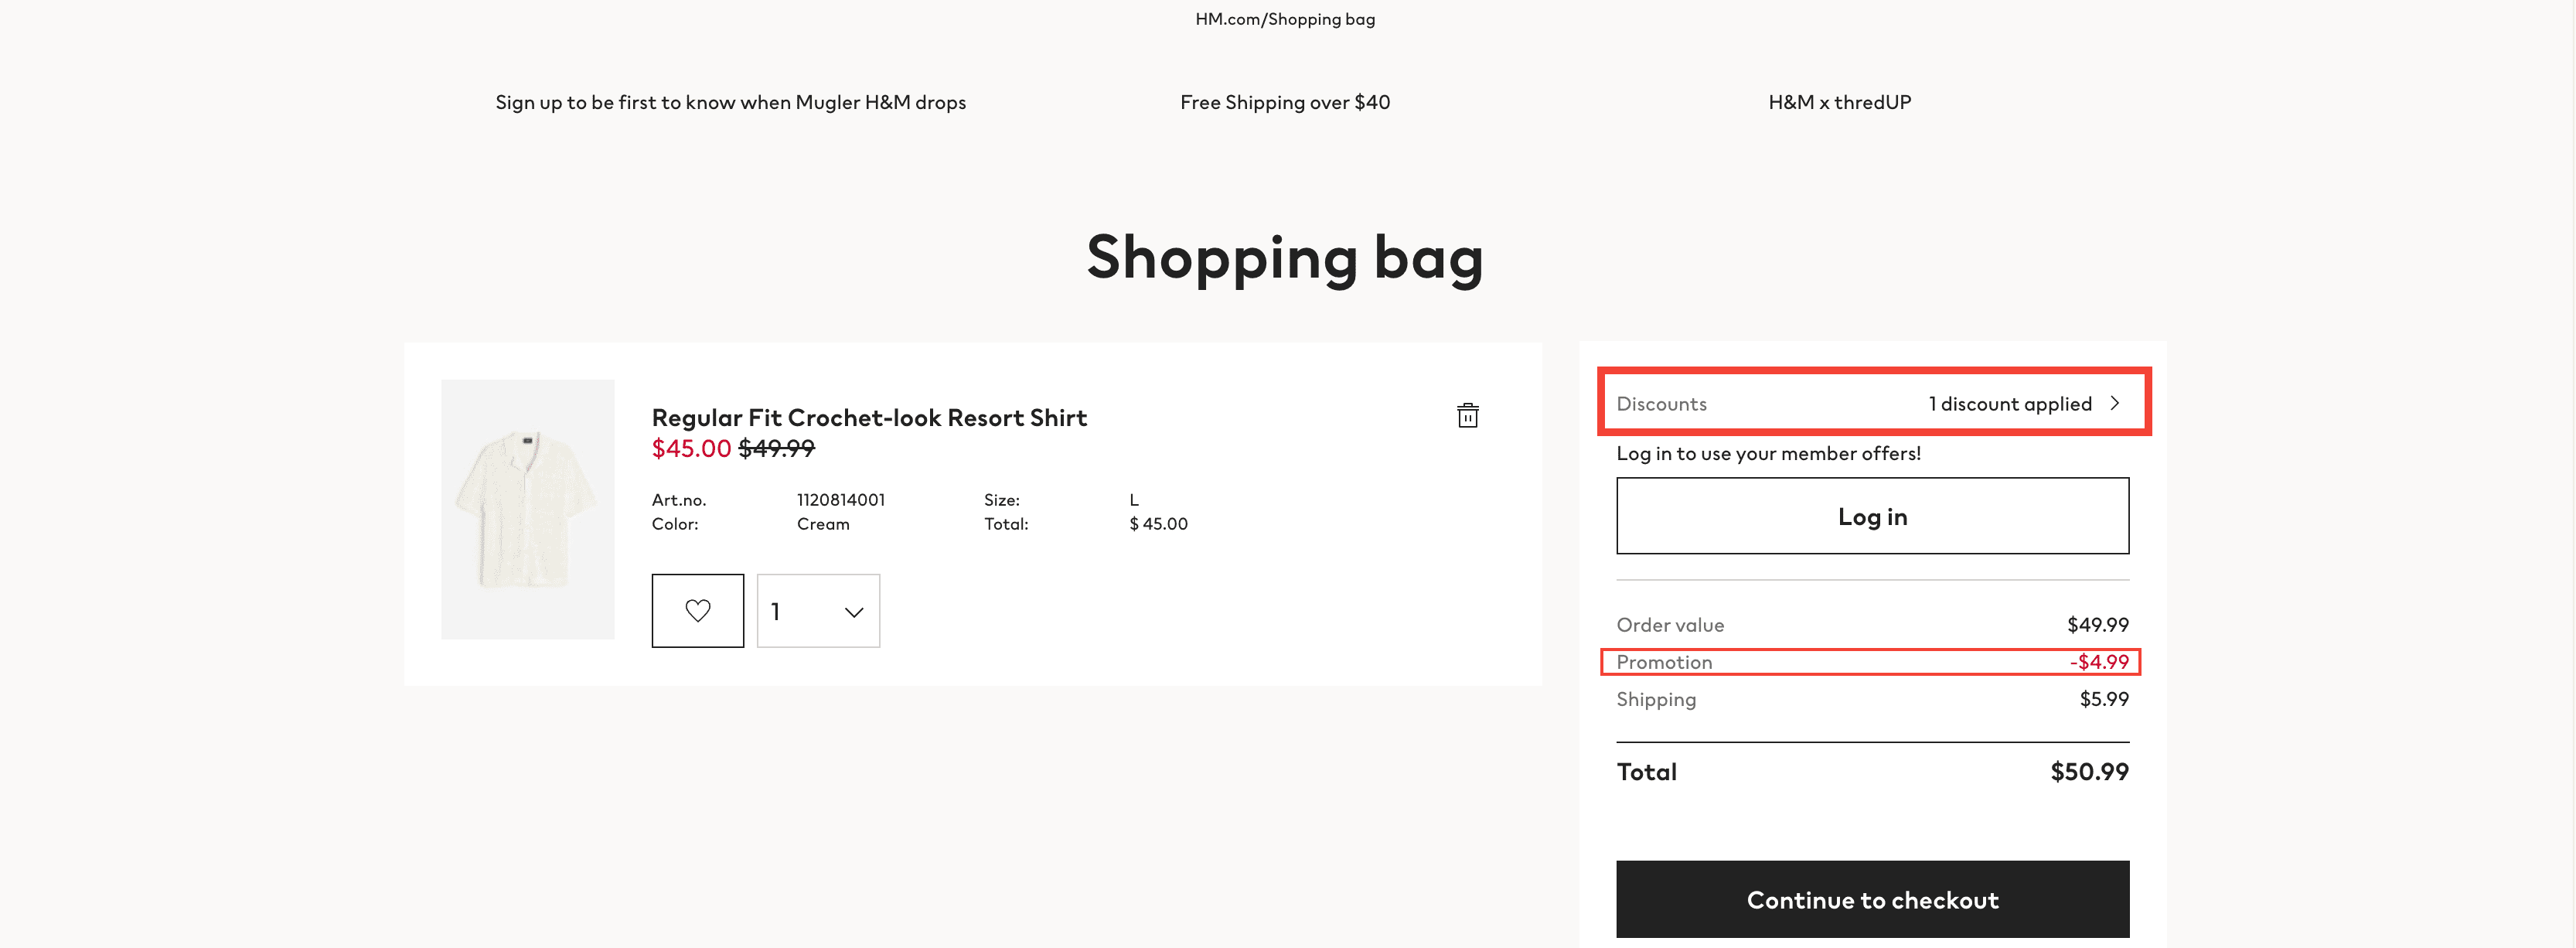 HnM Discount Code Sales Promotion Example.png